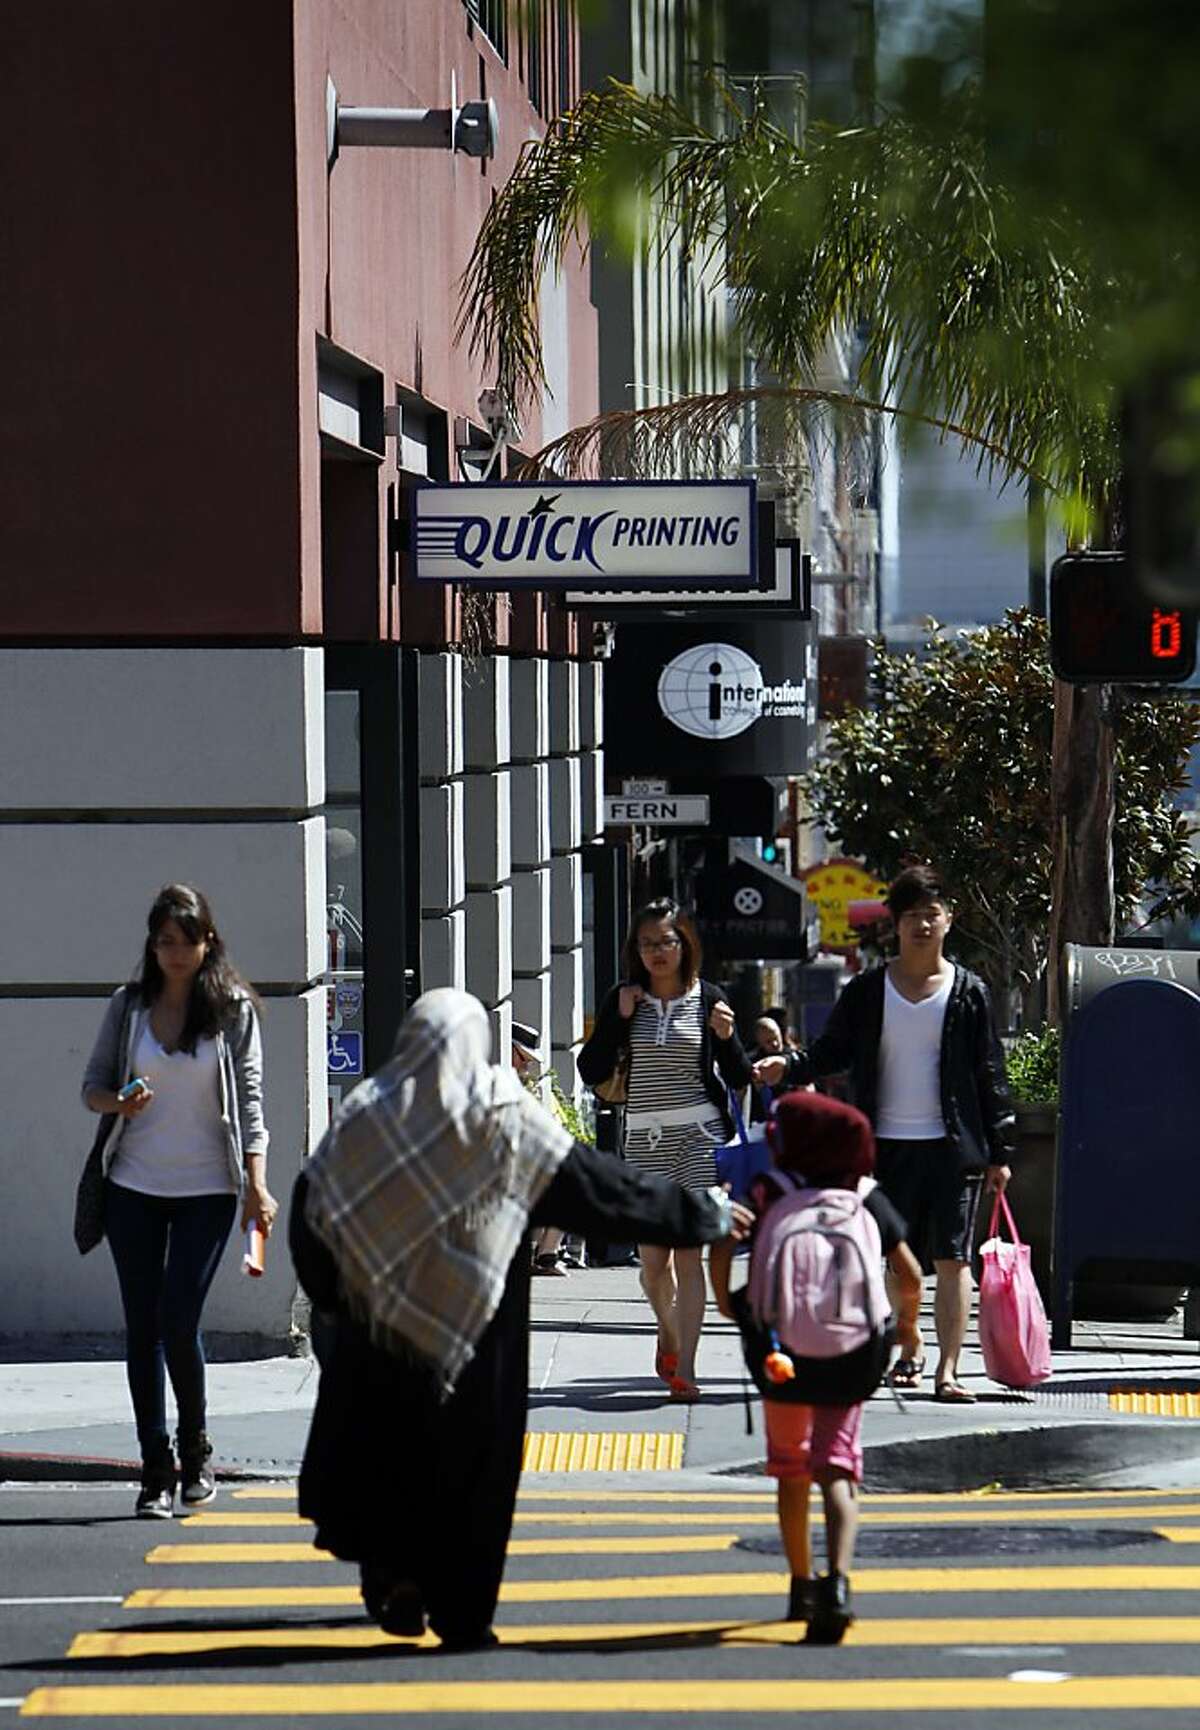 Pedestrians make their way through the crosswalk at the intersection of Polk Street and Bush Streets in San Francisco, Calif., on Tuesday, April 23, 2013. The Walk About Town column is about a project to improve Polk Street's walkability, where shoppers and pedestrians could get better safety in intersections and on the crowded sidewalks on Polk Street near Geary and Pine Streets.